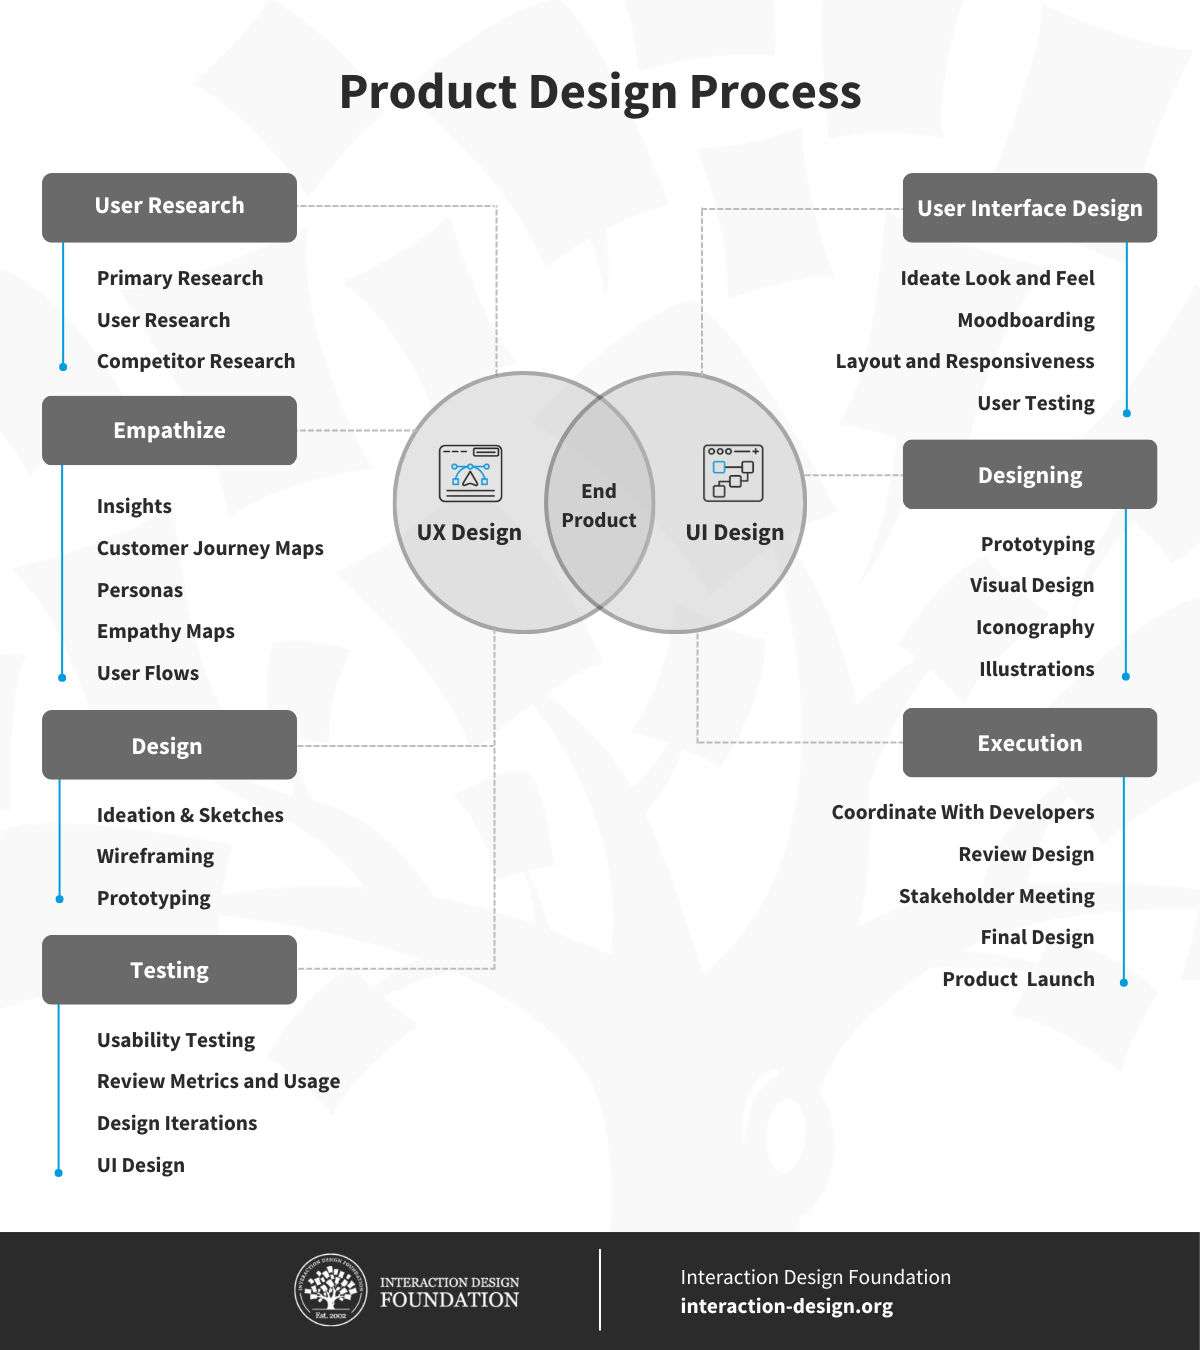 Can a product designer be a UX designer?